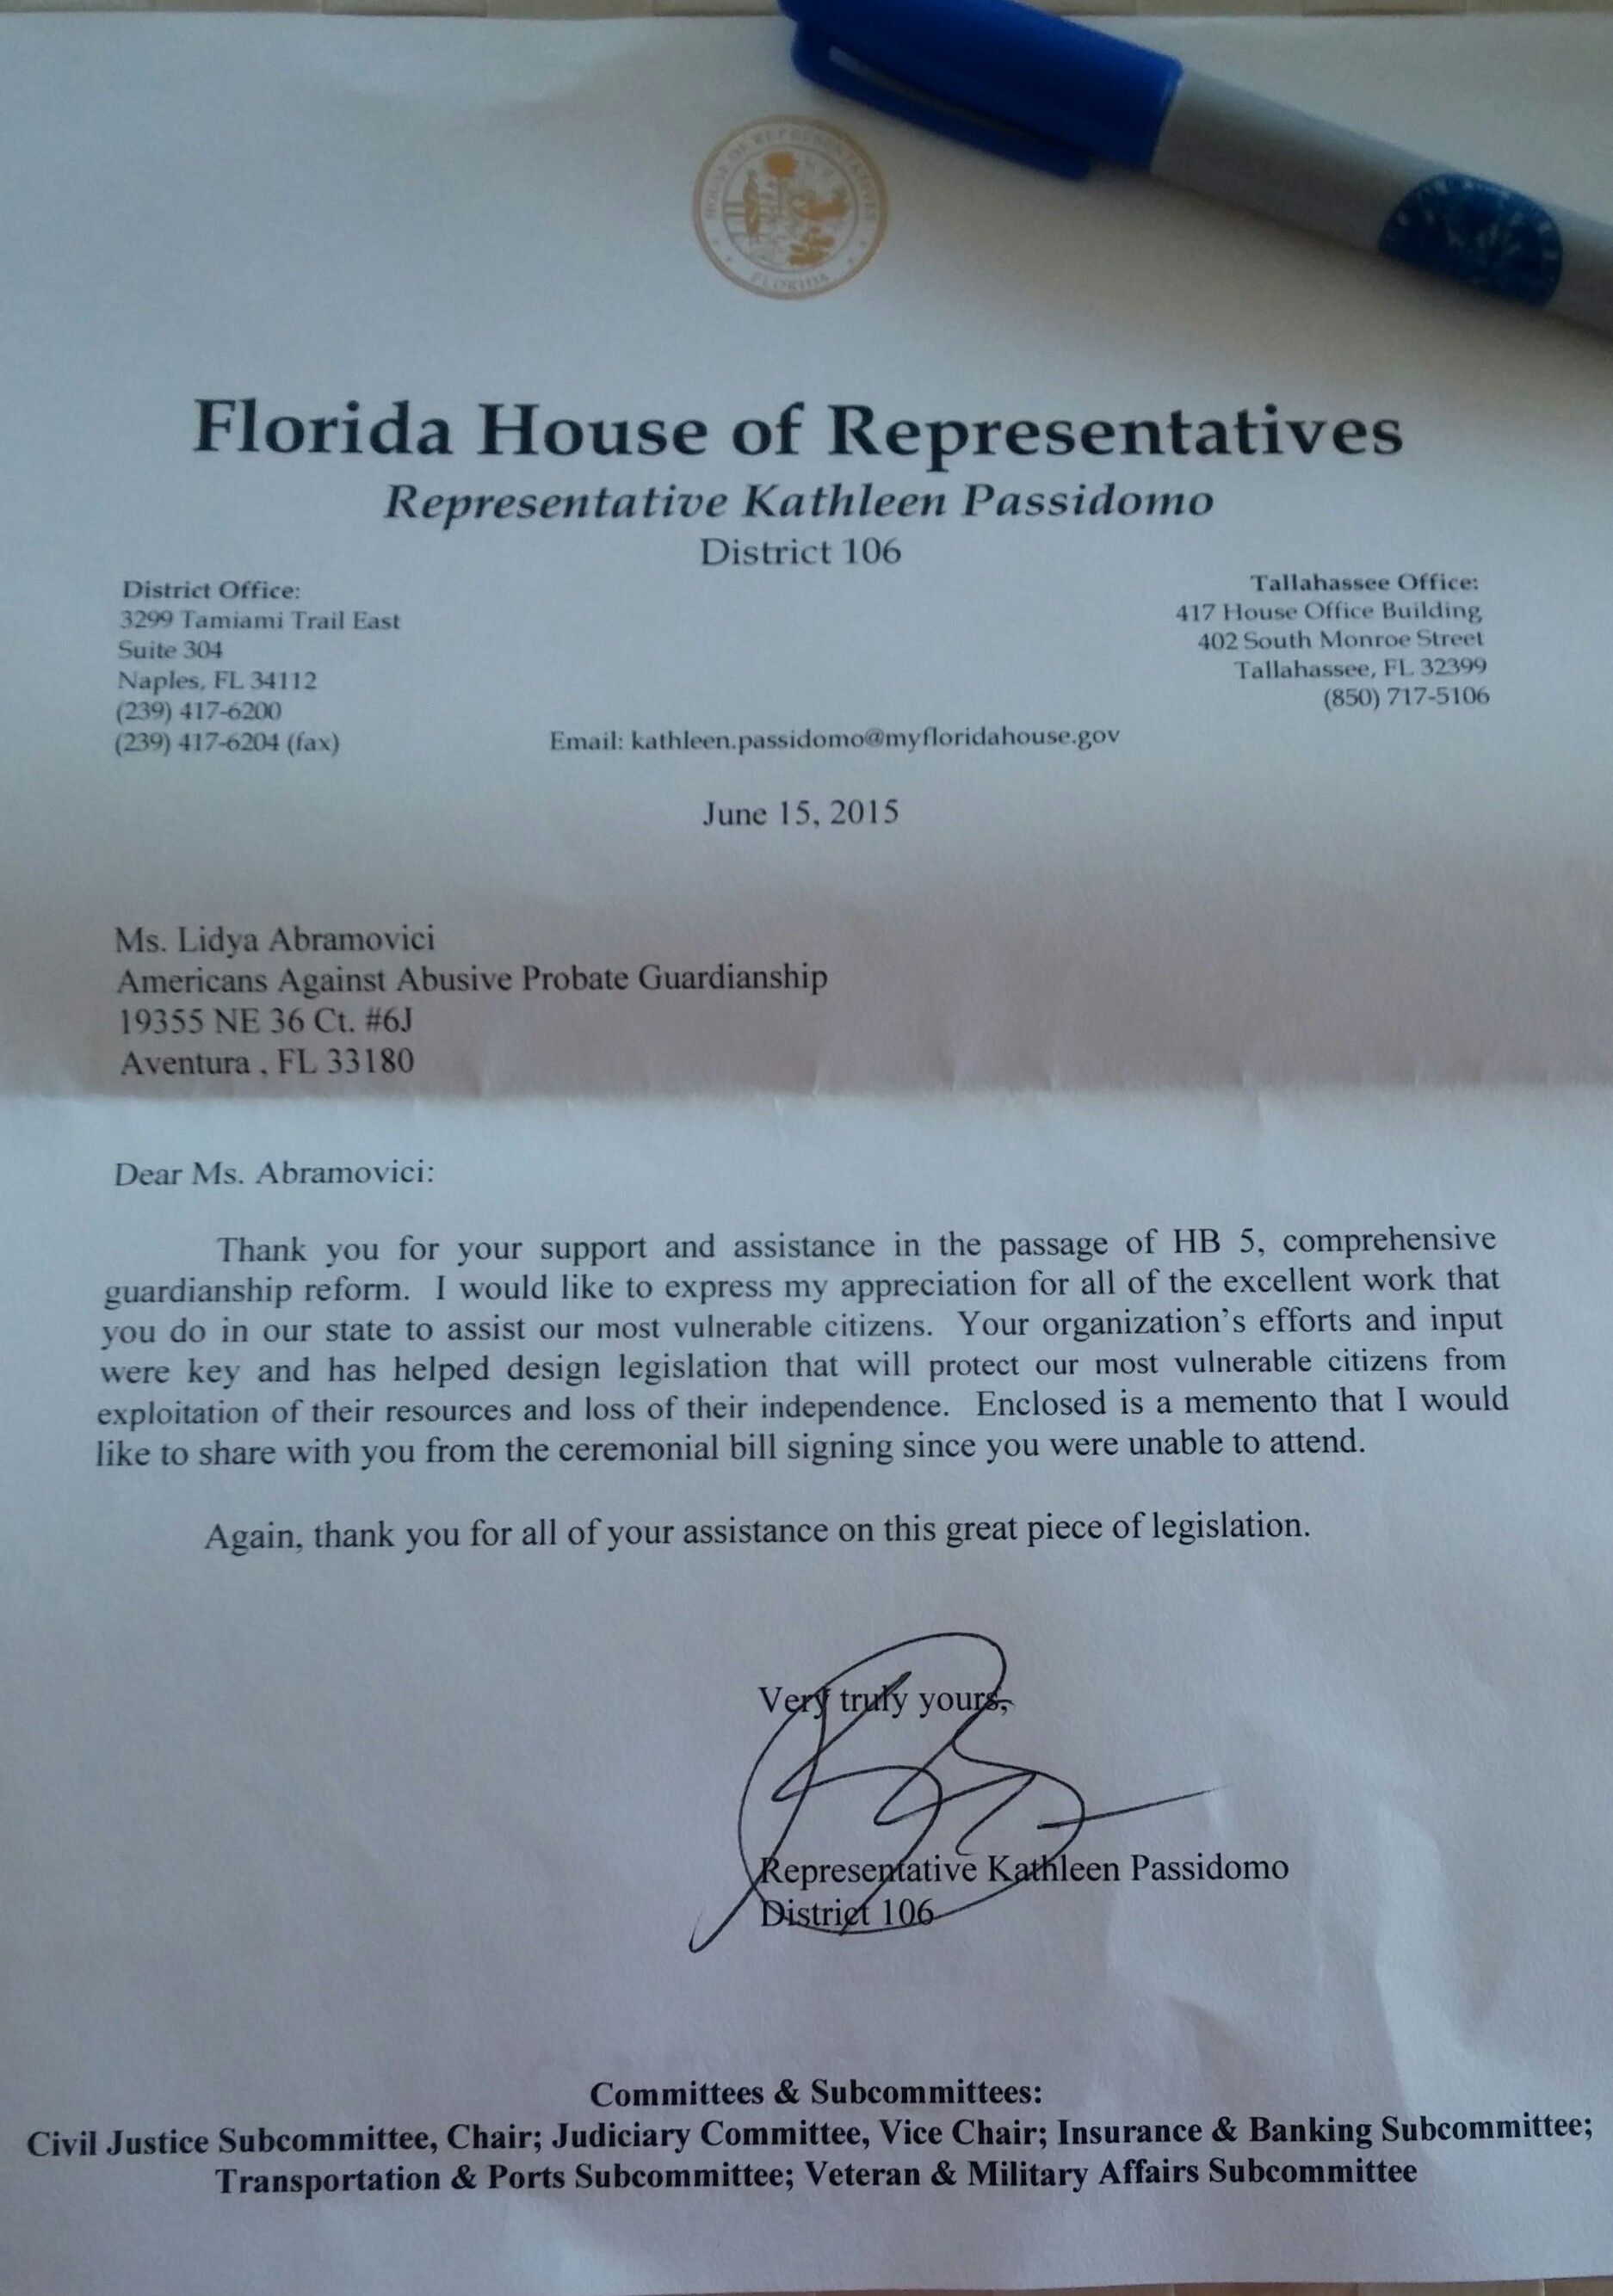 20115-06-22 Thank you letter from Rep Passidomo upon passage of HB 5